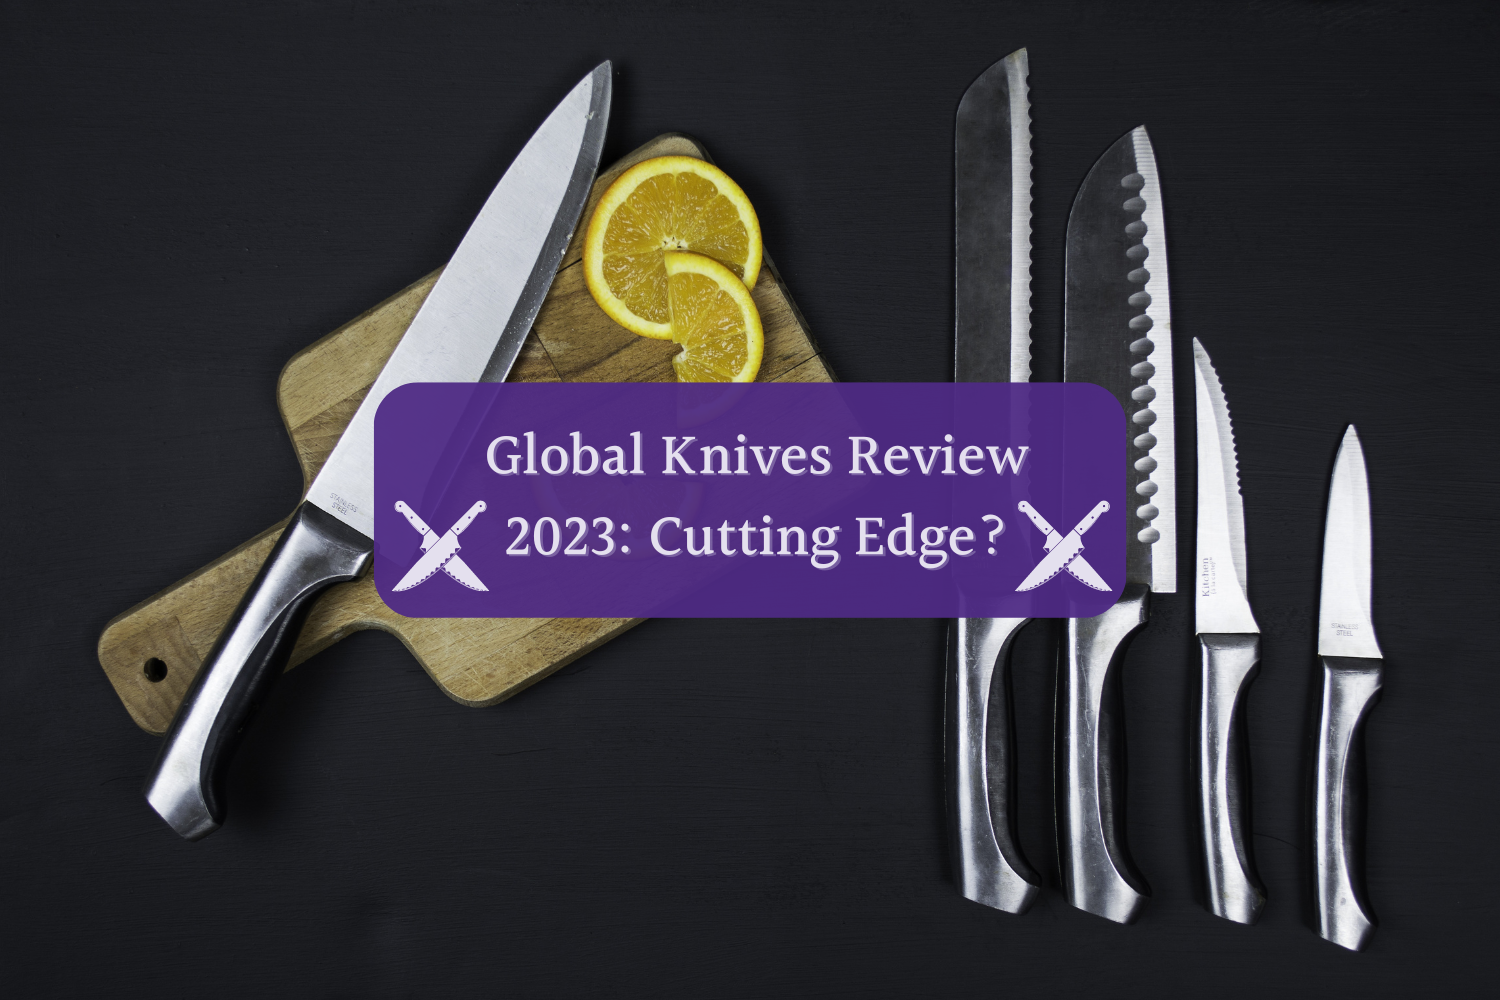 Global Knives Review 